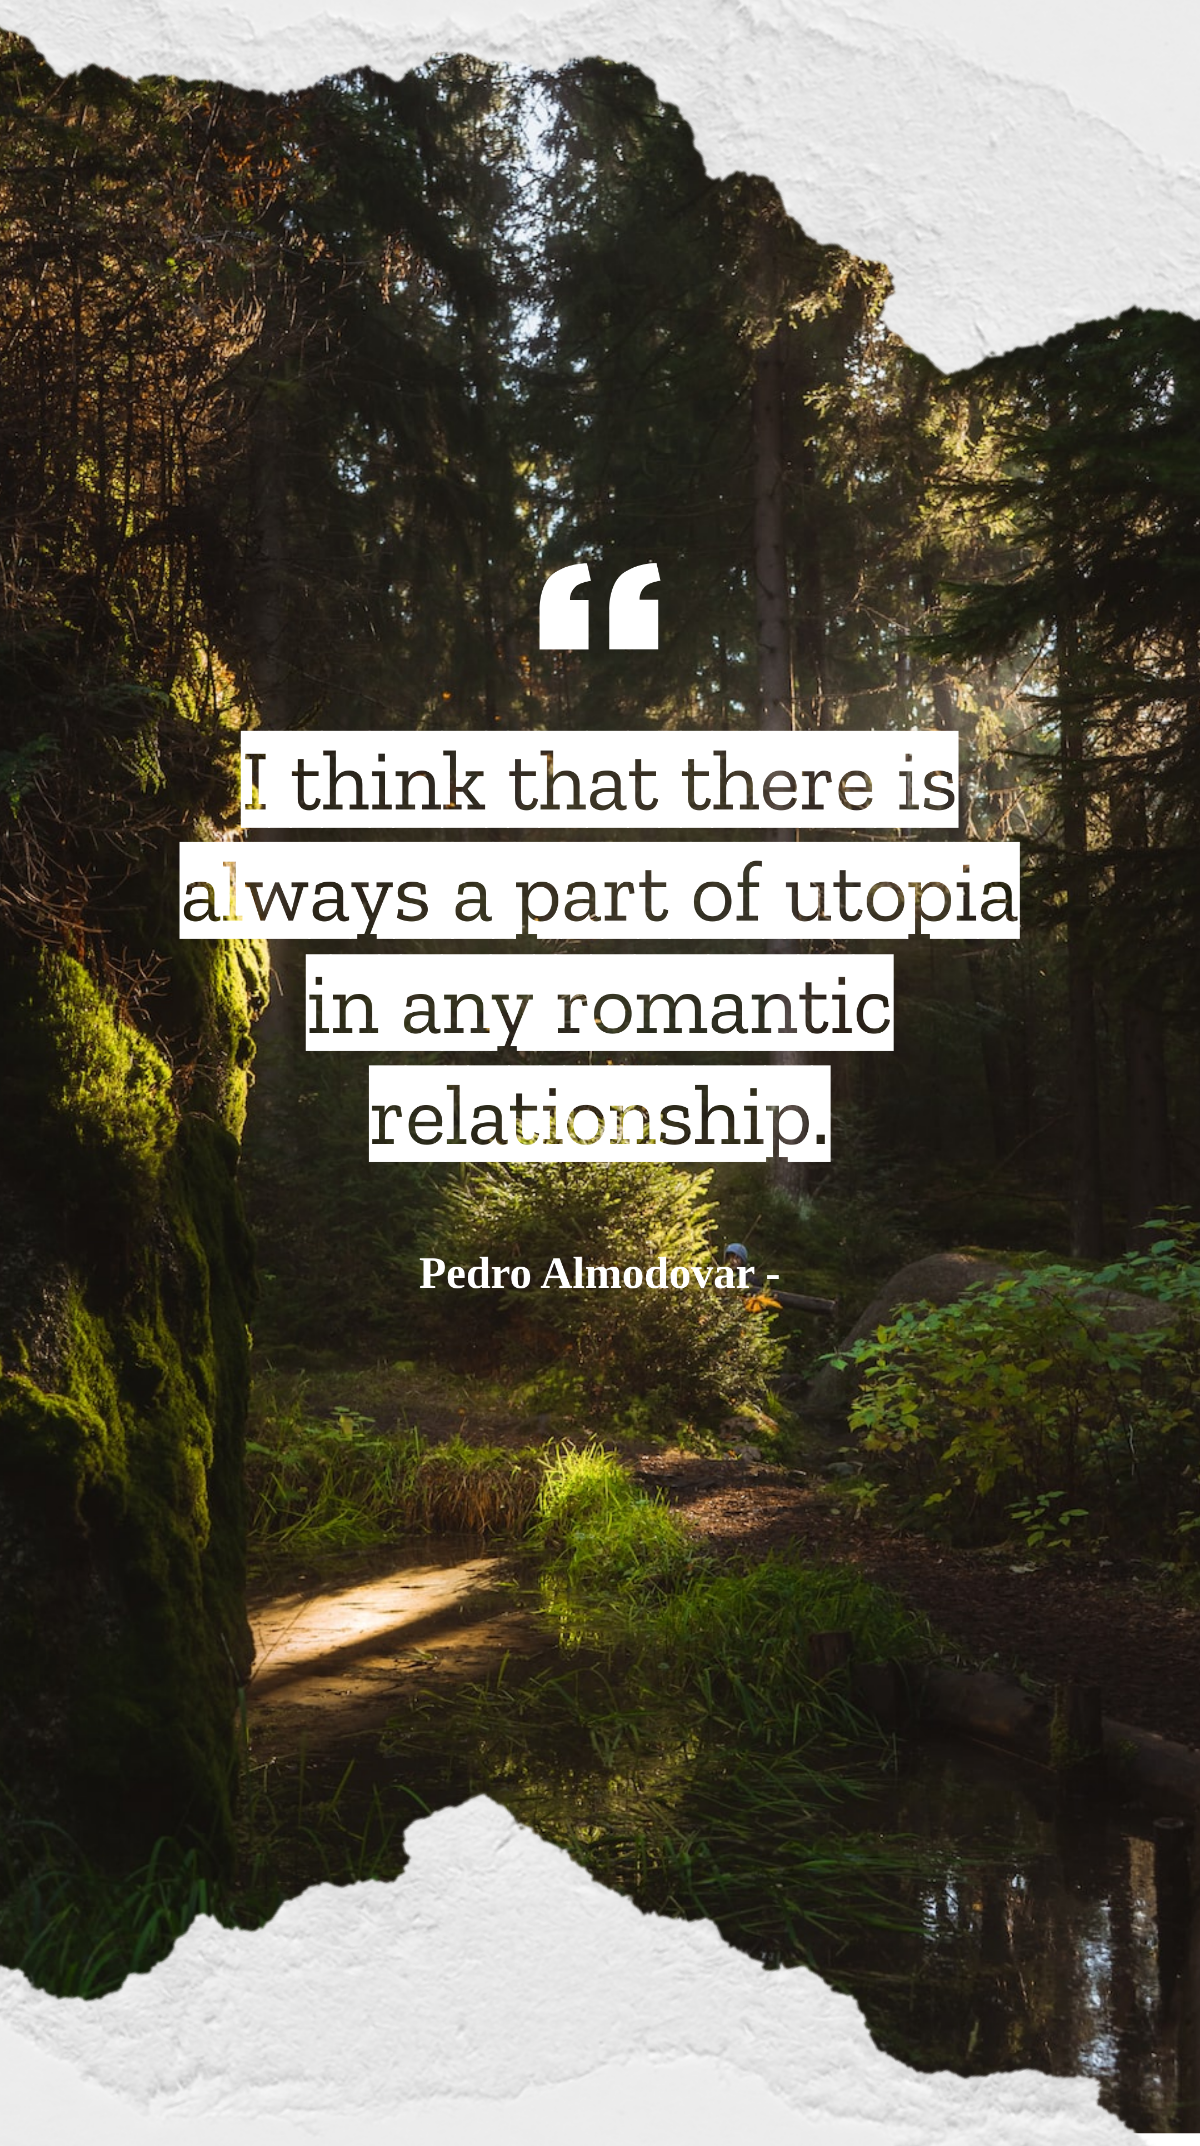 Pedro Almodovar - I think that there is always a part of utopia in any romantic relationship. Template